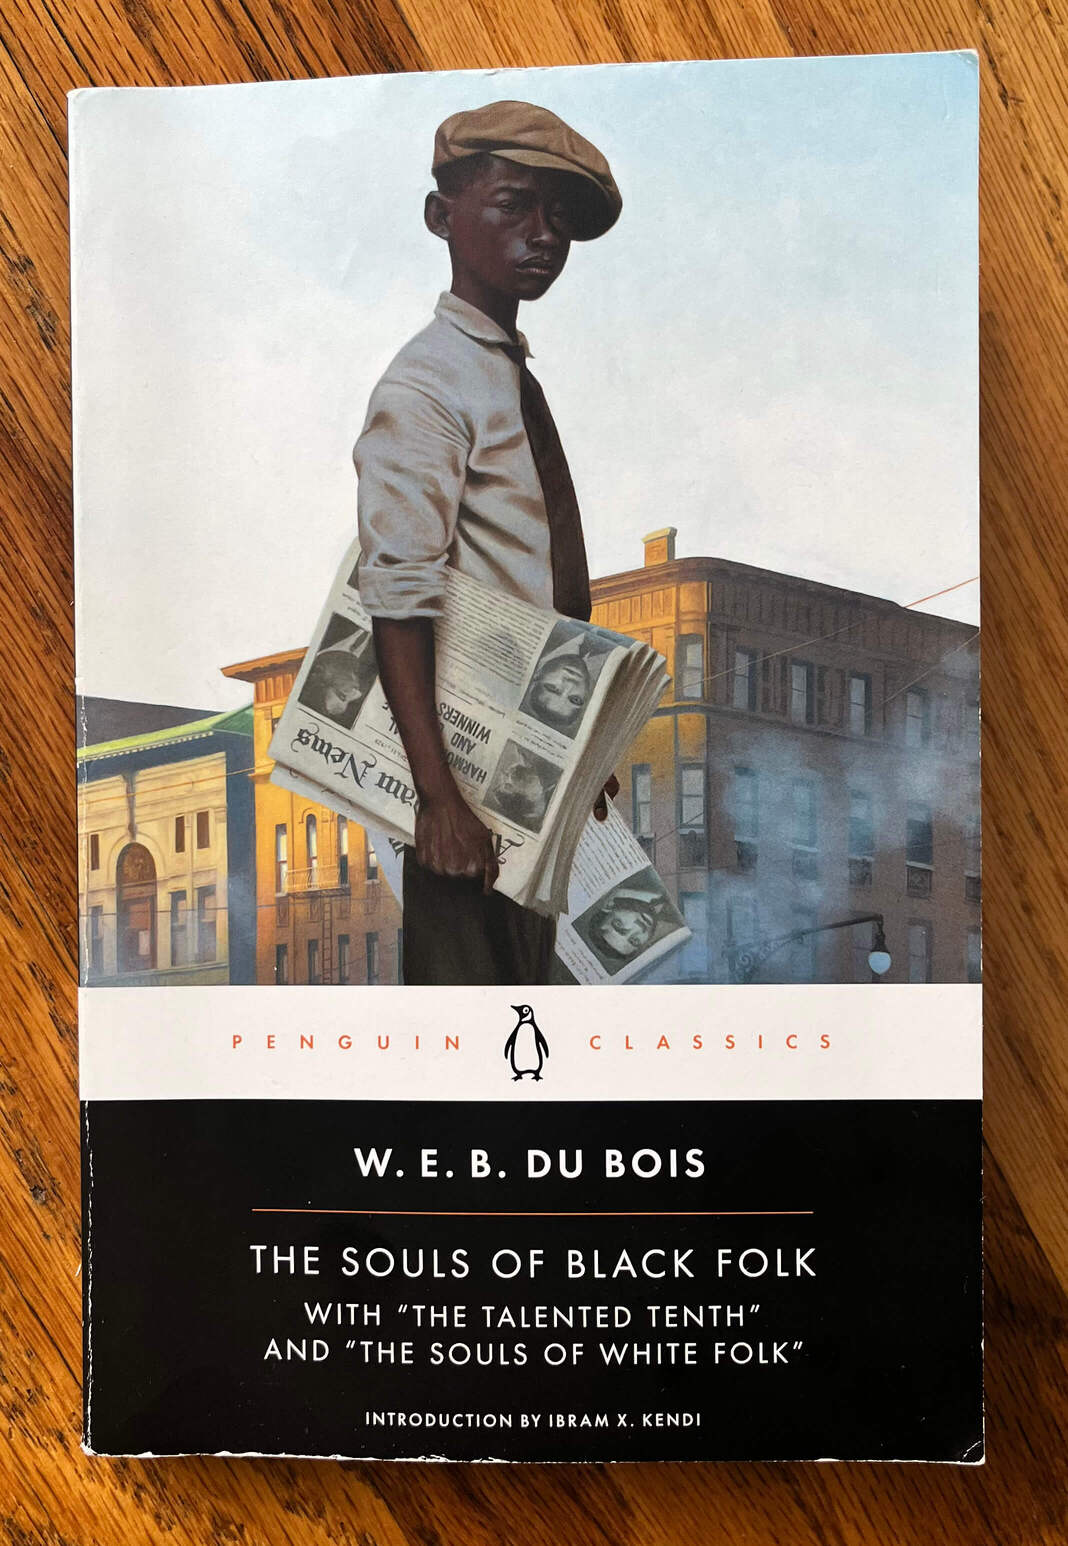 “The Souls of Black Folks” by W.E.B Du Bois. With “The Talented Tenth” and “The Souls of White Folk” Introduction by Ibram X. Kendi.